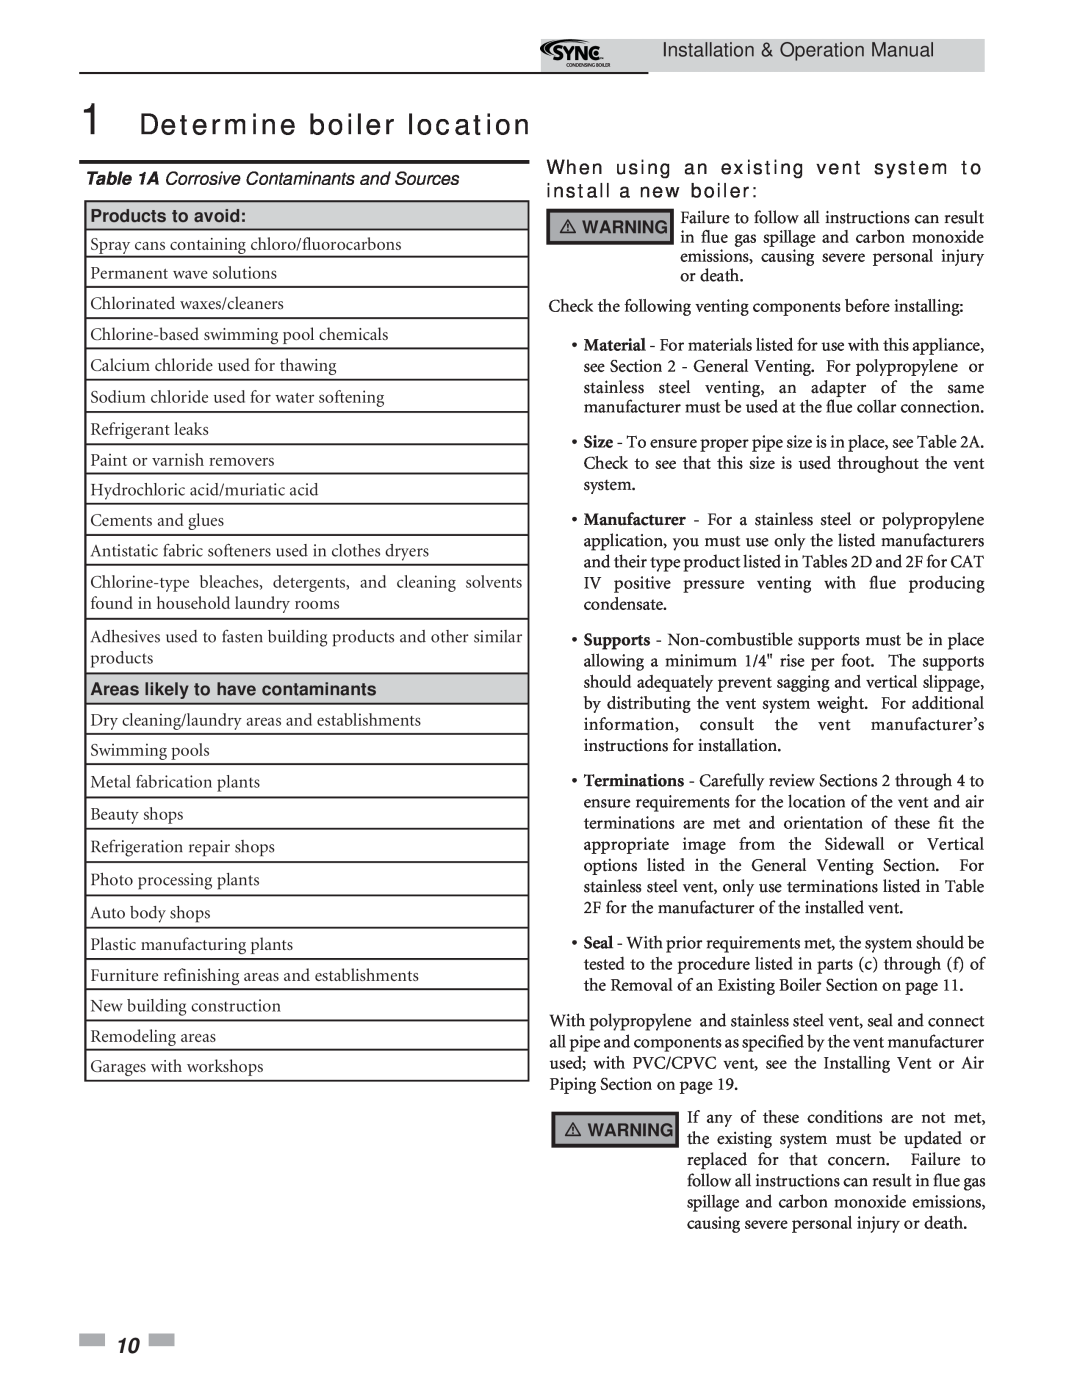 Lochinvar 5 operation manual A Corrosive Contaminants and Sources, Products to avoid, Areas likely to have contaminants 